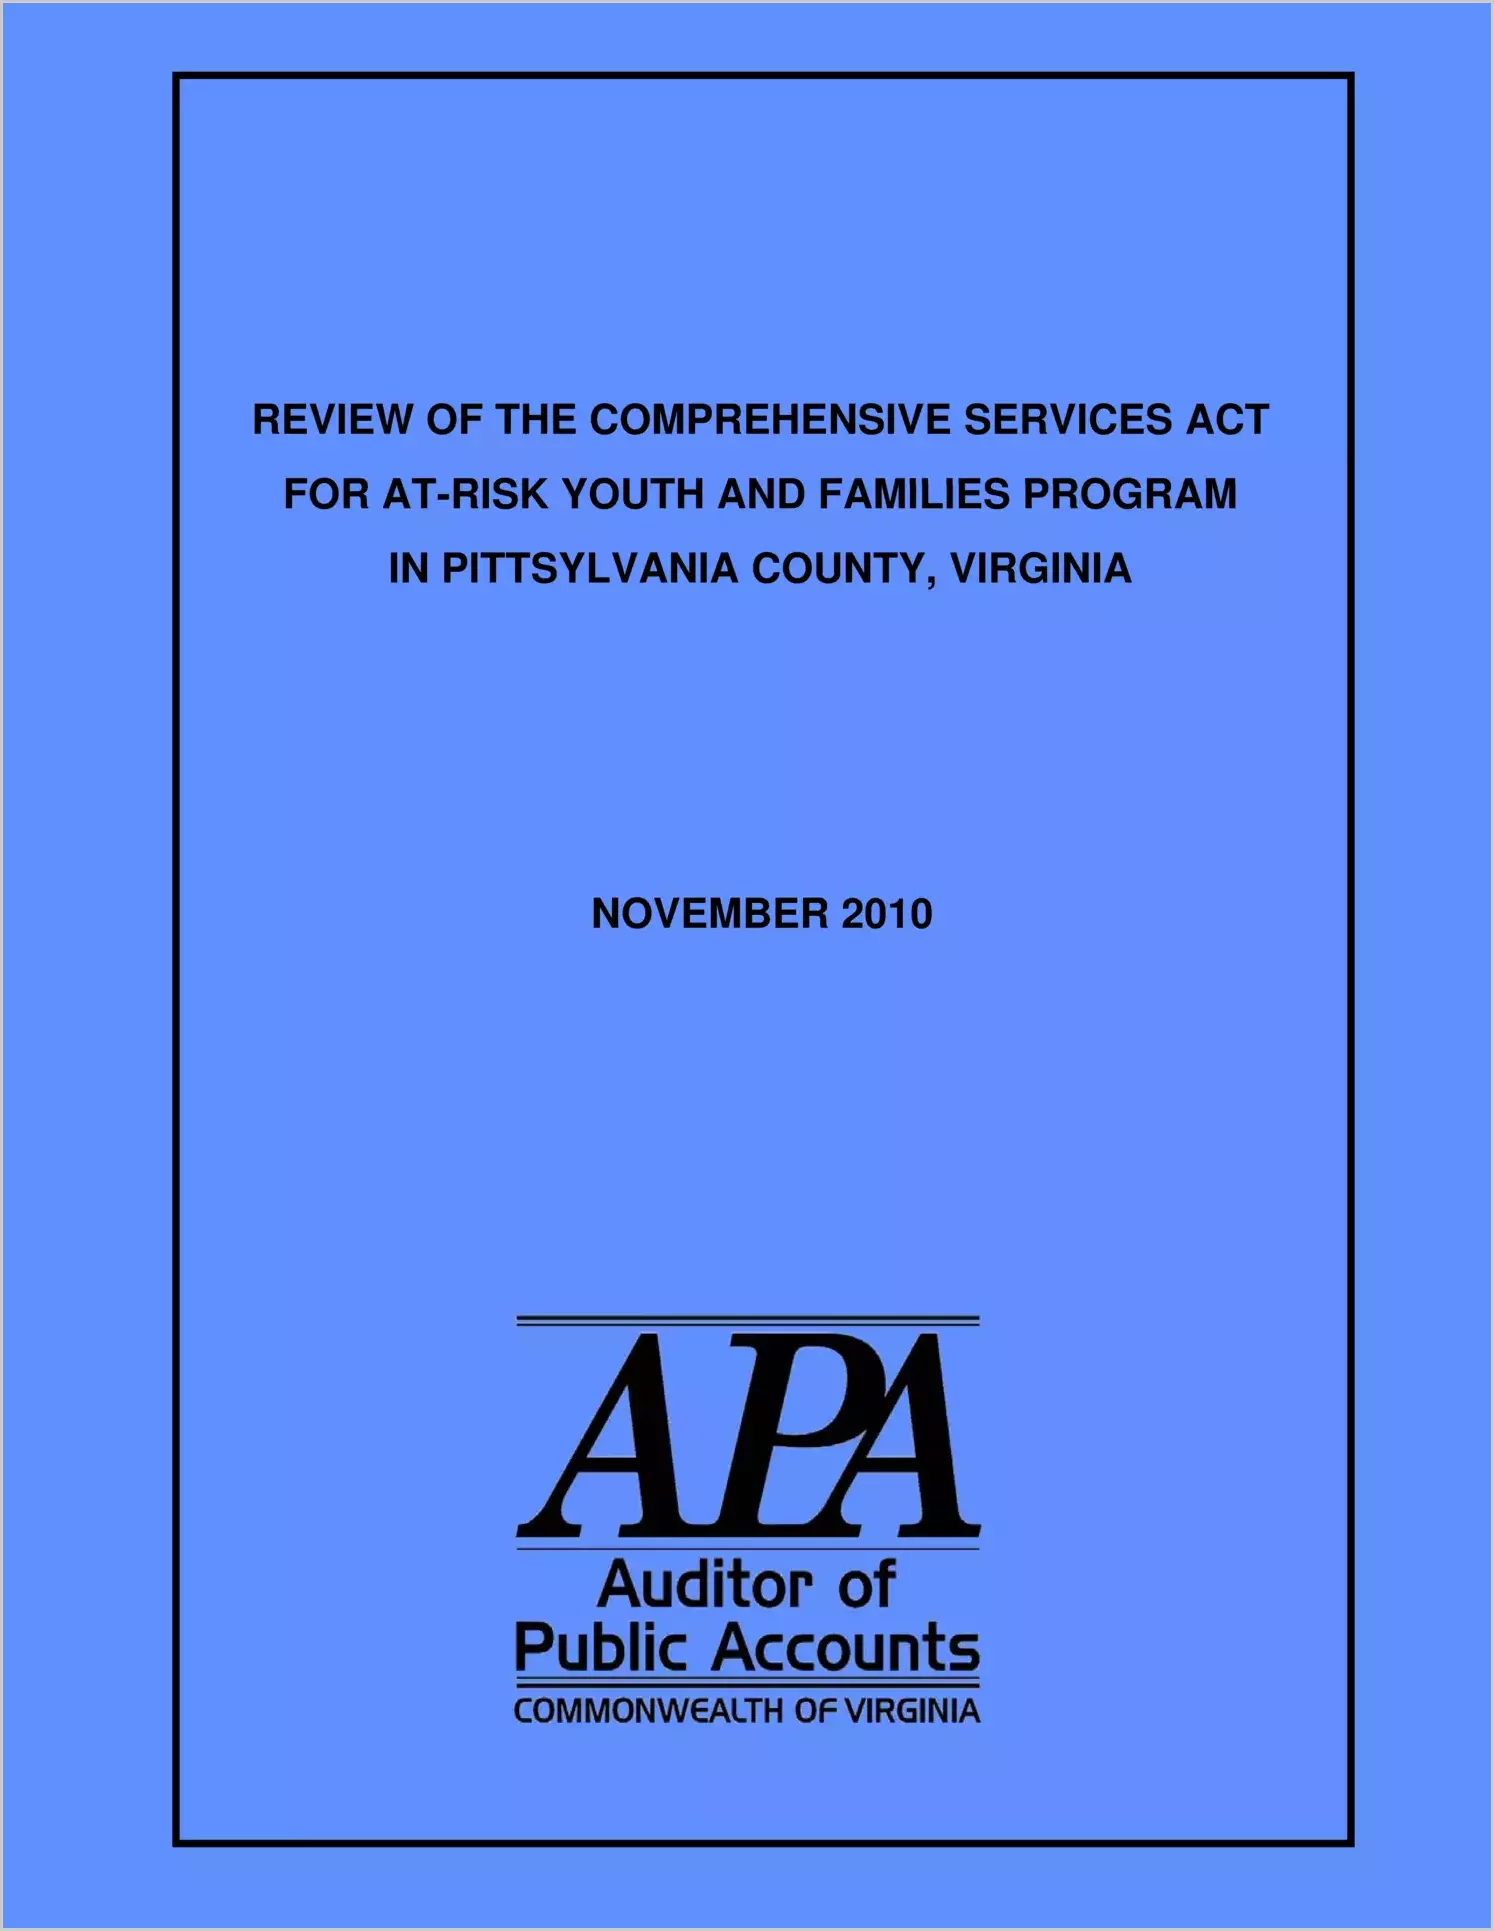 Review of the Comprehensive Services Act for At-Risk Youth and Families Program in Pittsylvania County - November 2010